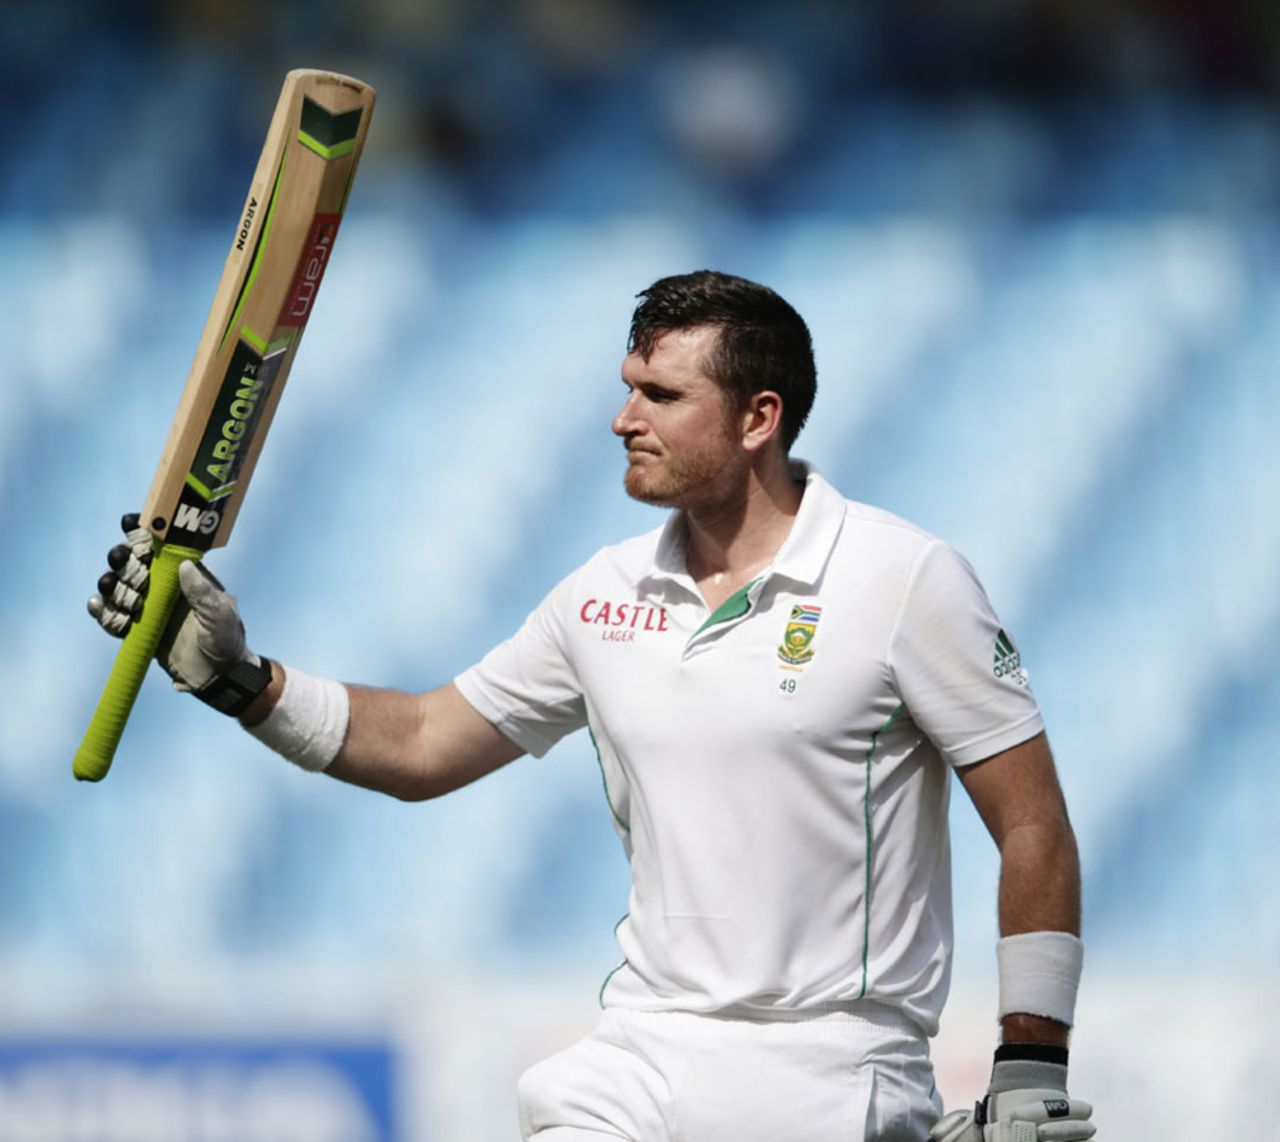 Graeme Smith departed for 234, Pakistan v South Africa, 2nd Test, Dubai, 3rd day, October 25, 2013